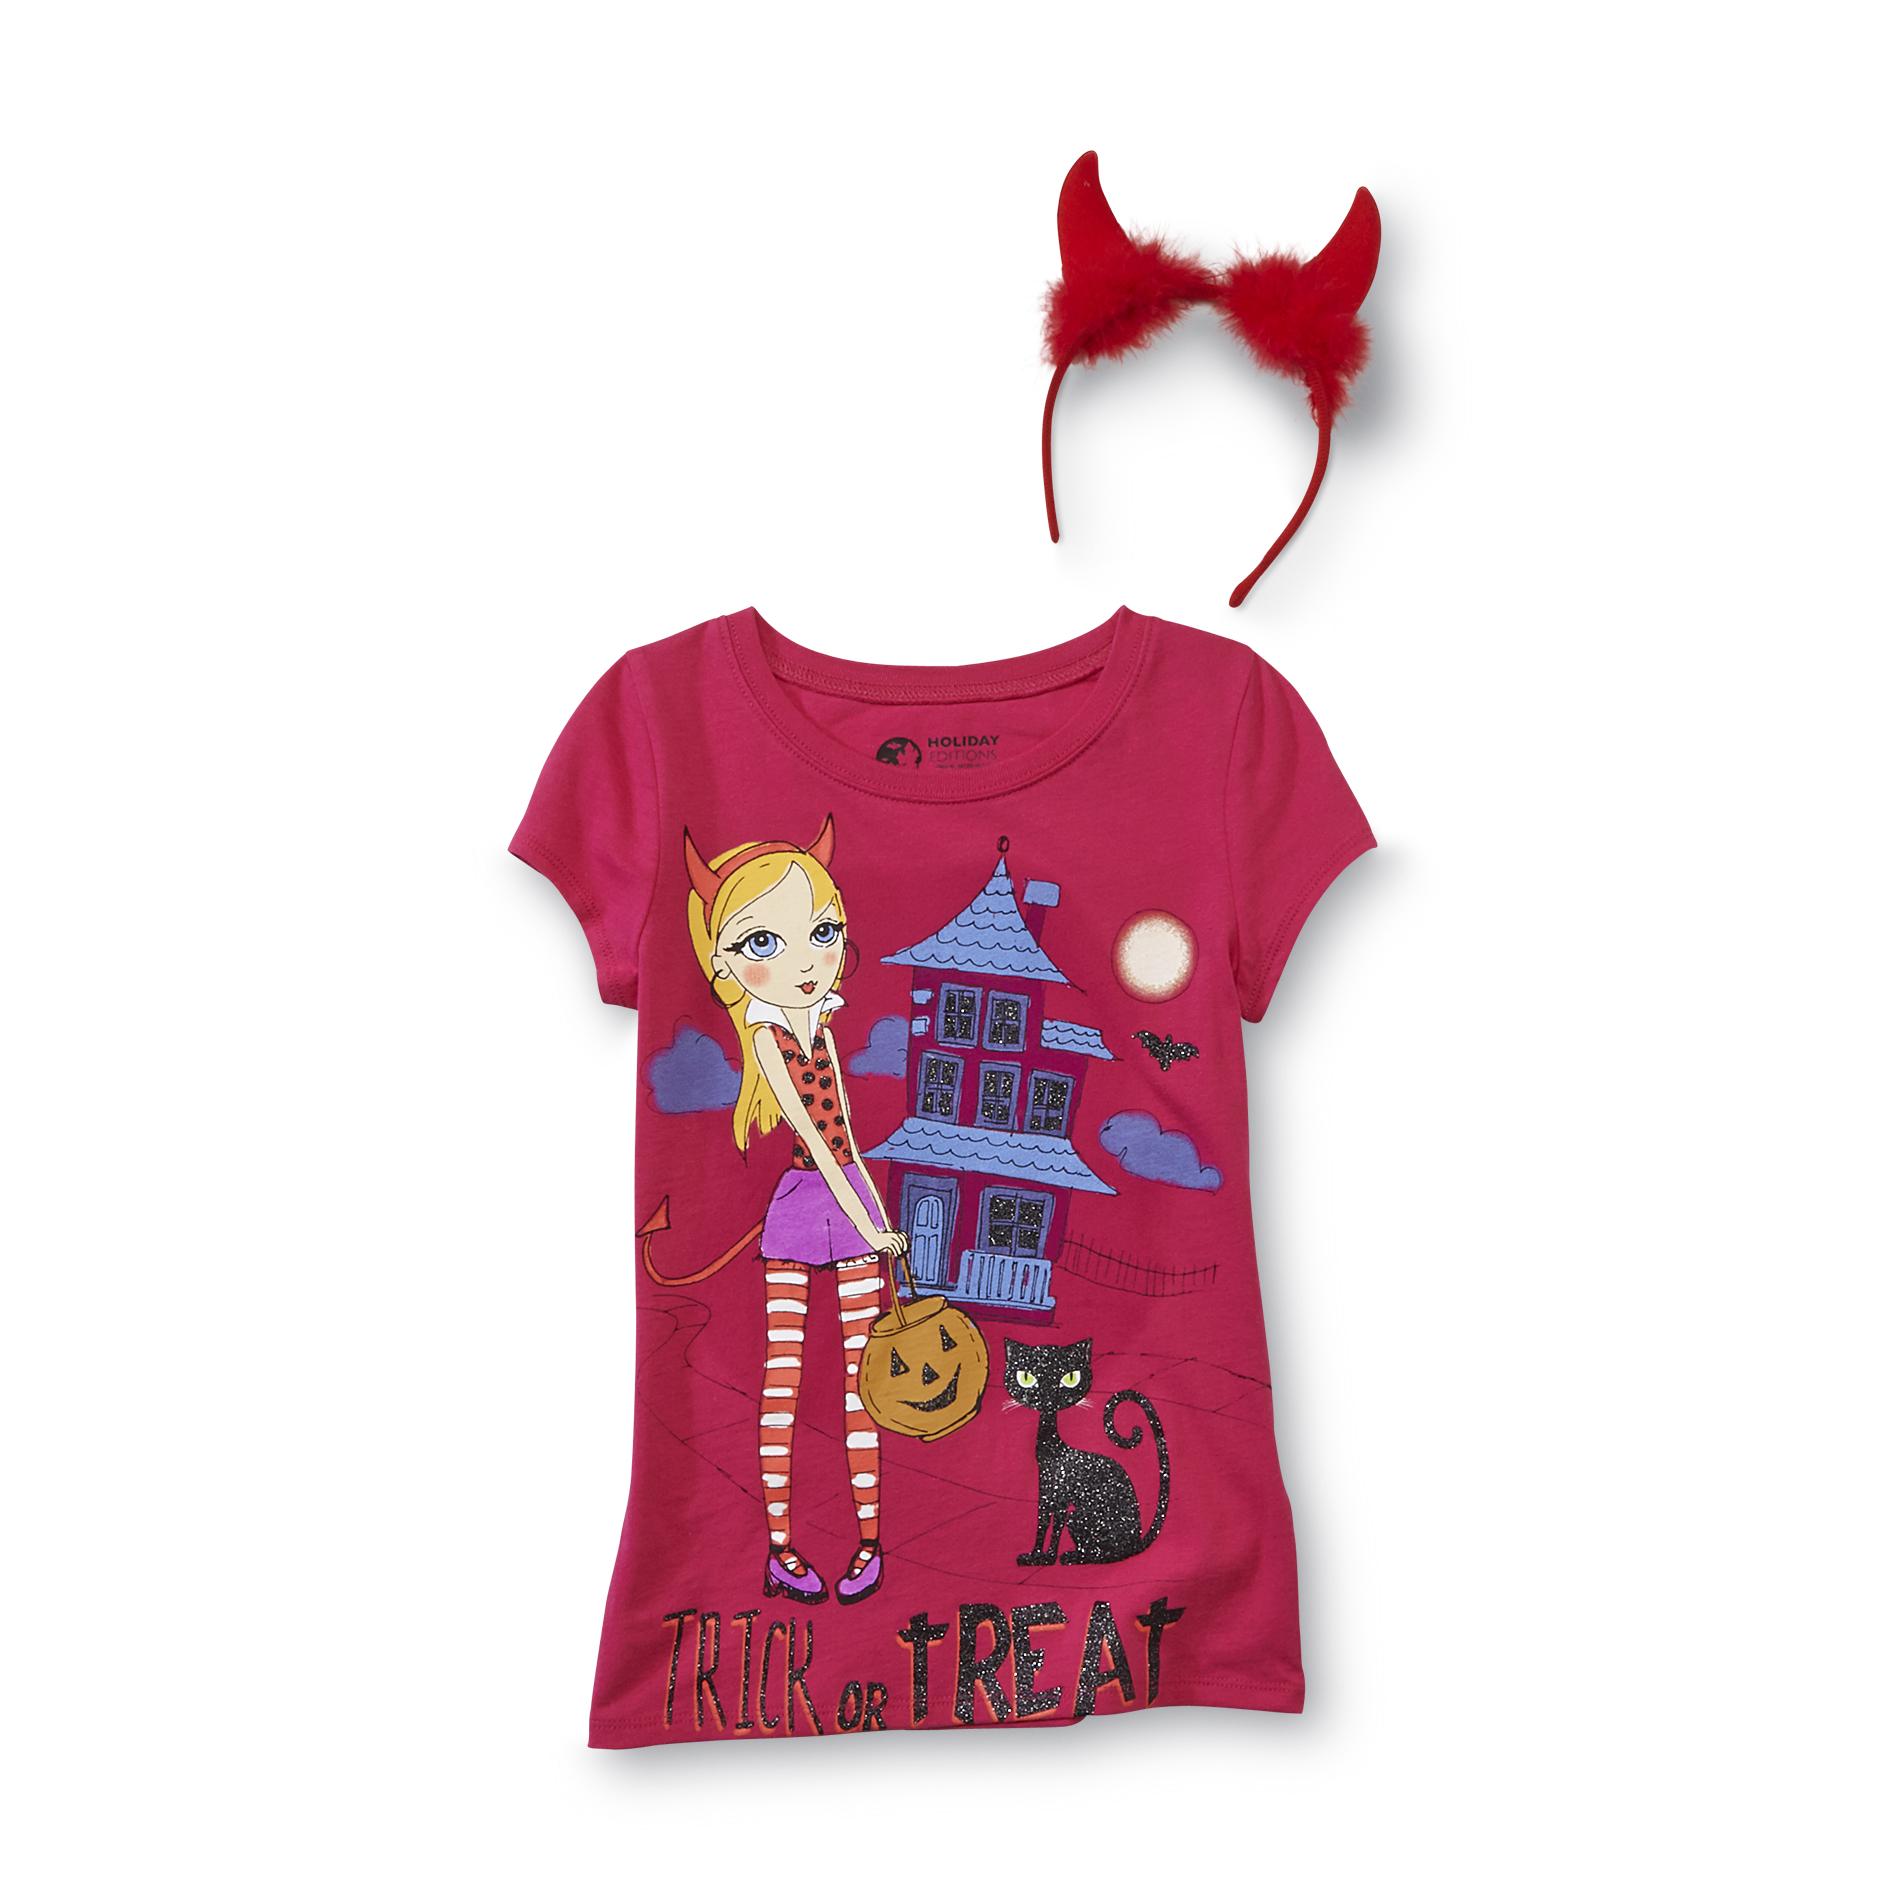 Holiday Editions Girl's Graphic T-Shirt & Horns Headband - Trick Or Treat